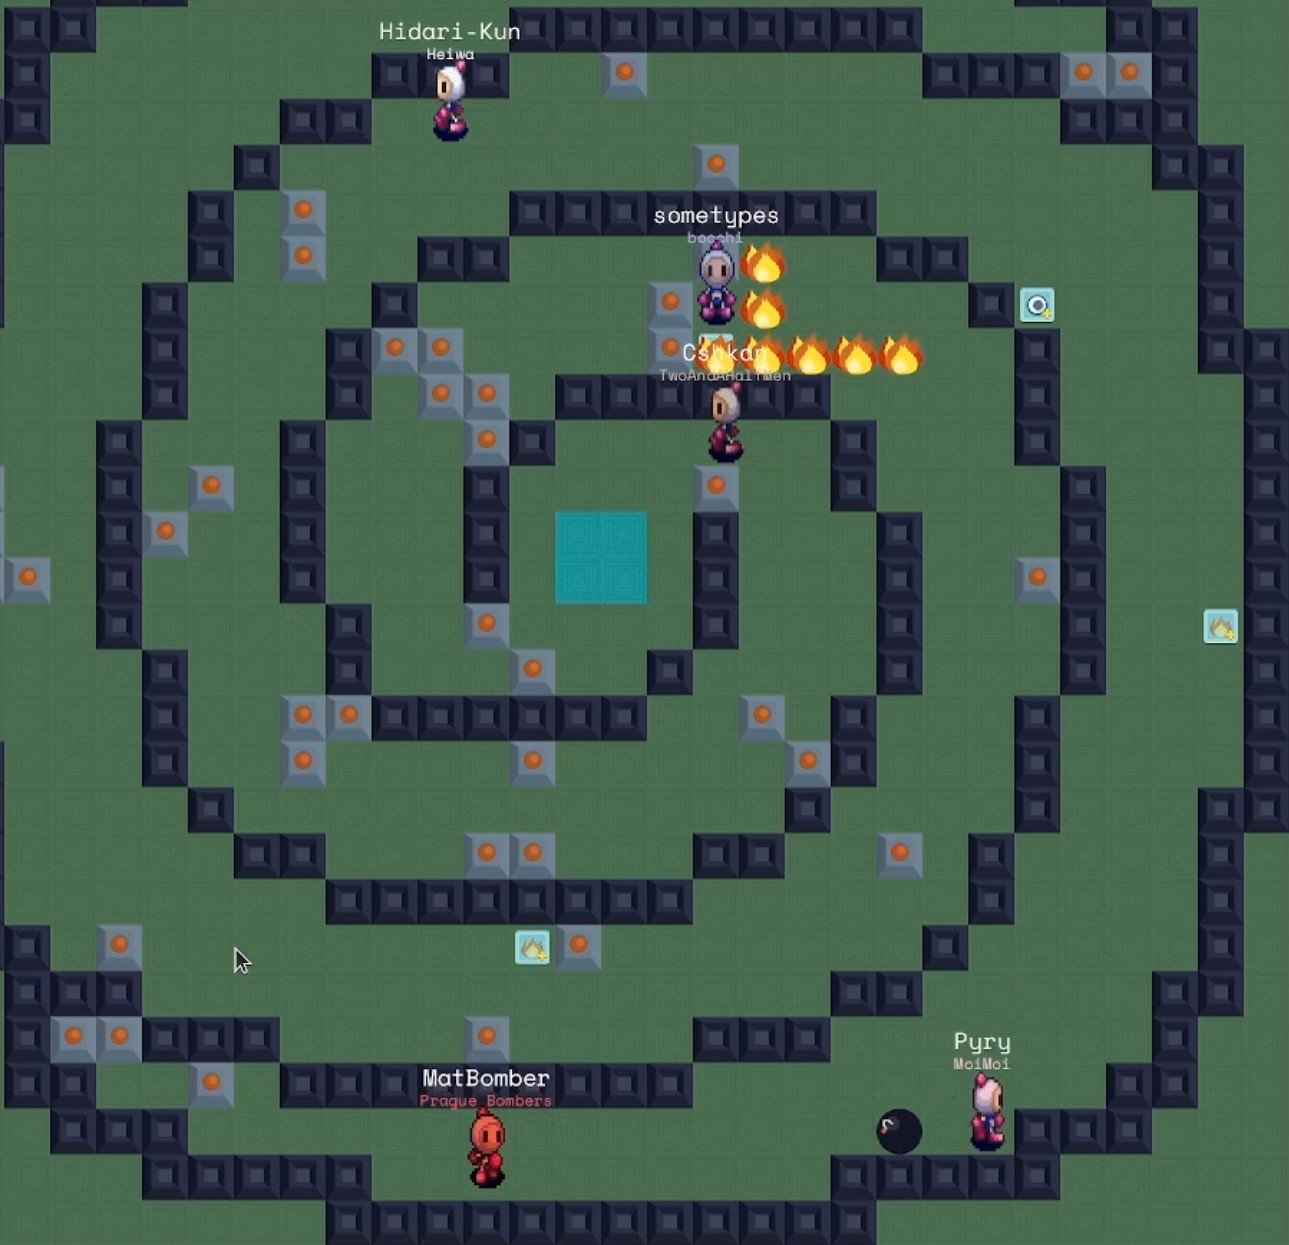 screenshot of the game: many players, block and an explosion